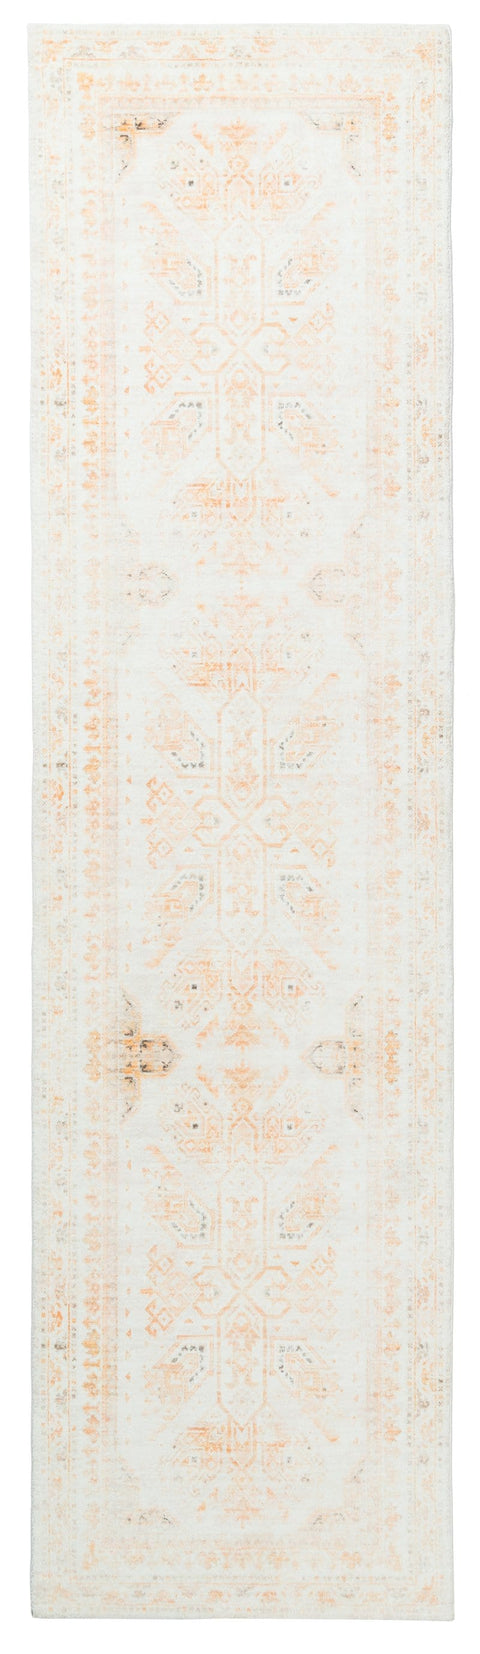 Mina Orange and Cream Transitional Washable Runner Rug *NO RETURNS UNLESS FAULTY